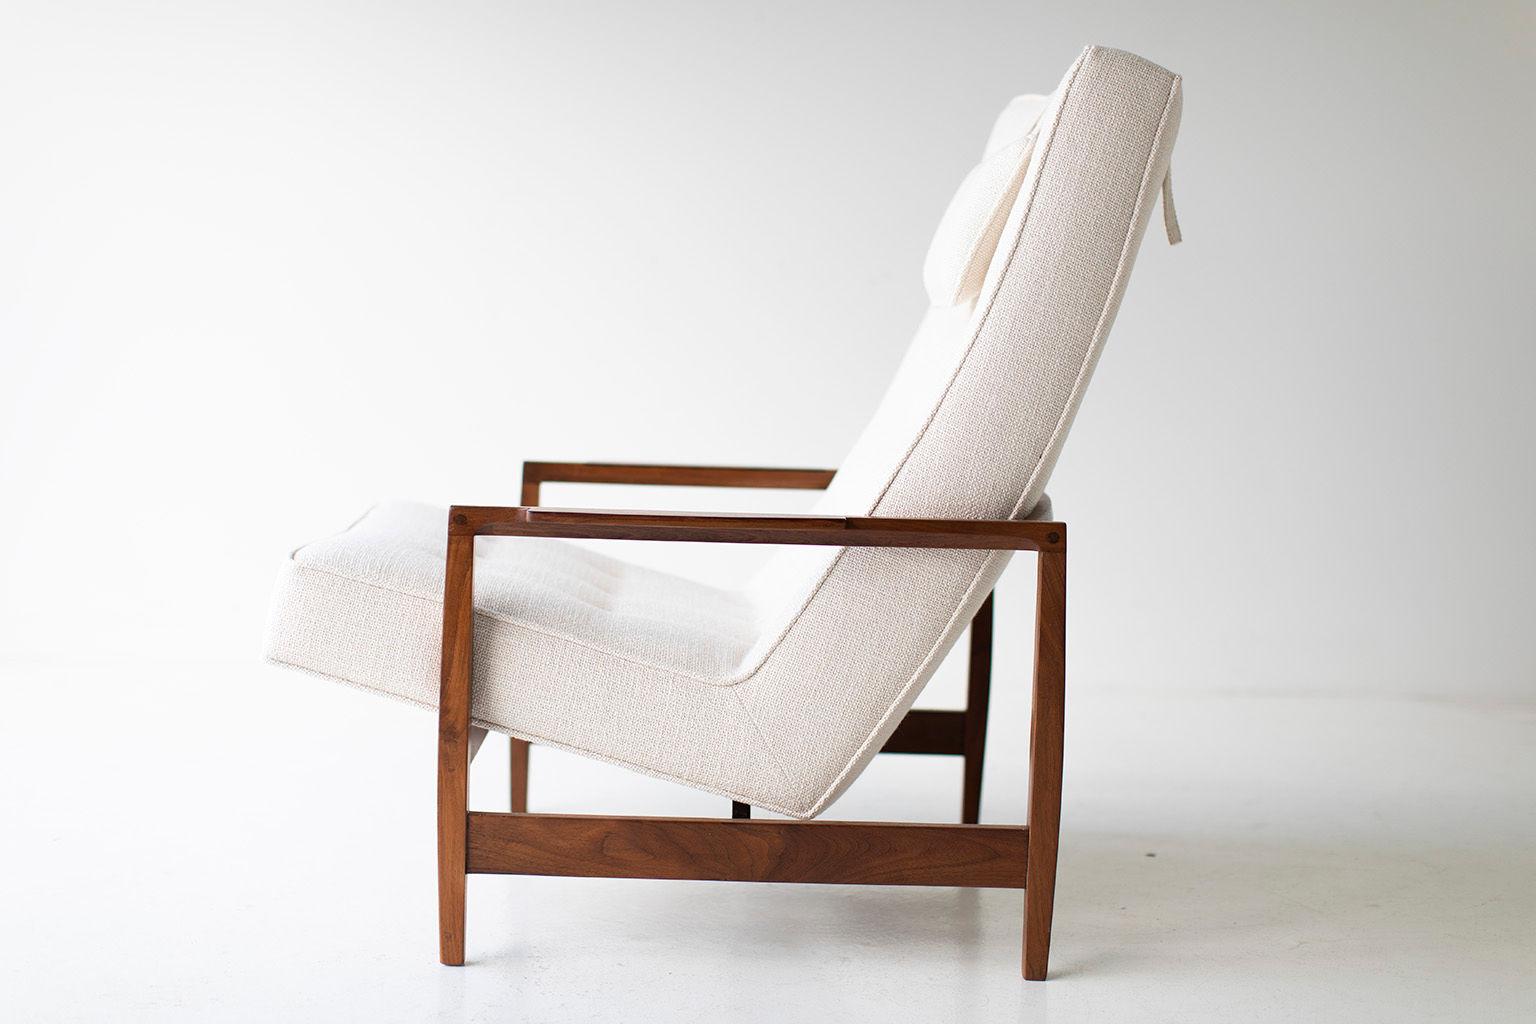 Designer: Kipp Stewart

Manufacturer: Directional Furniture
Period/Model: Mid-Century Modern
Specs: Walnut or rosewood, thick weave blend

condition: 

This Kipp Stewart lounge chair and ottoman for Directional Furniture is in excellent